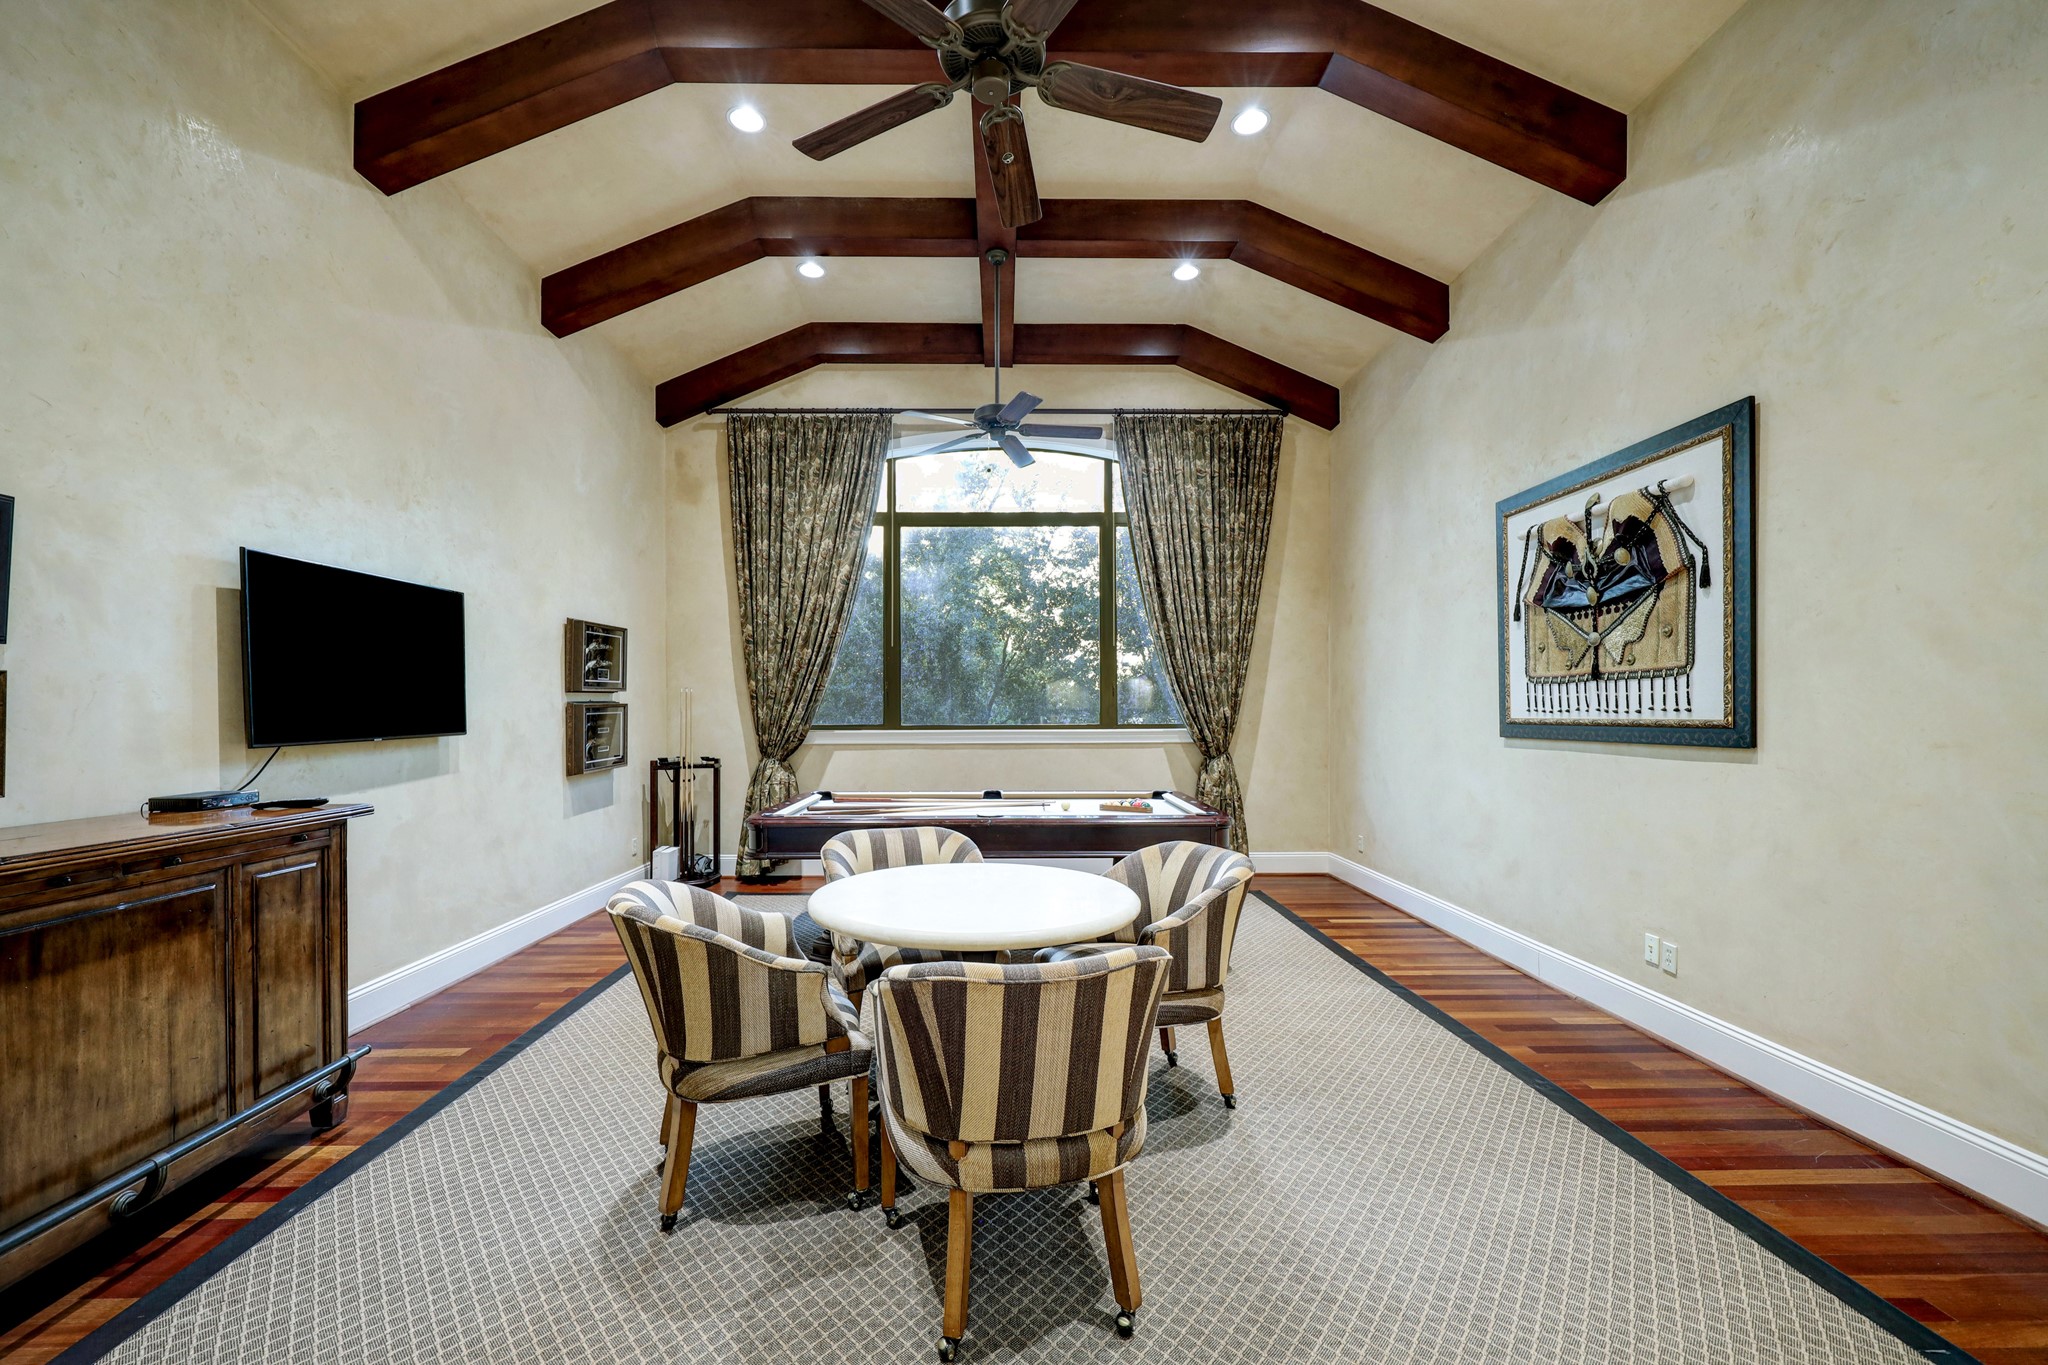 The Game Room [21 x 18] is located on the second floor and features hardwood floors, baseboards, a raised and beamed ceiling and Segretto walls.